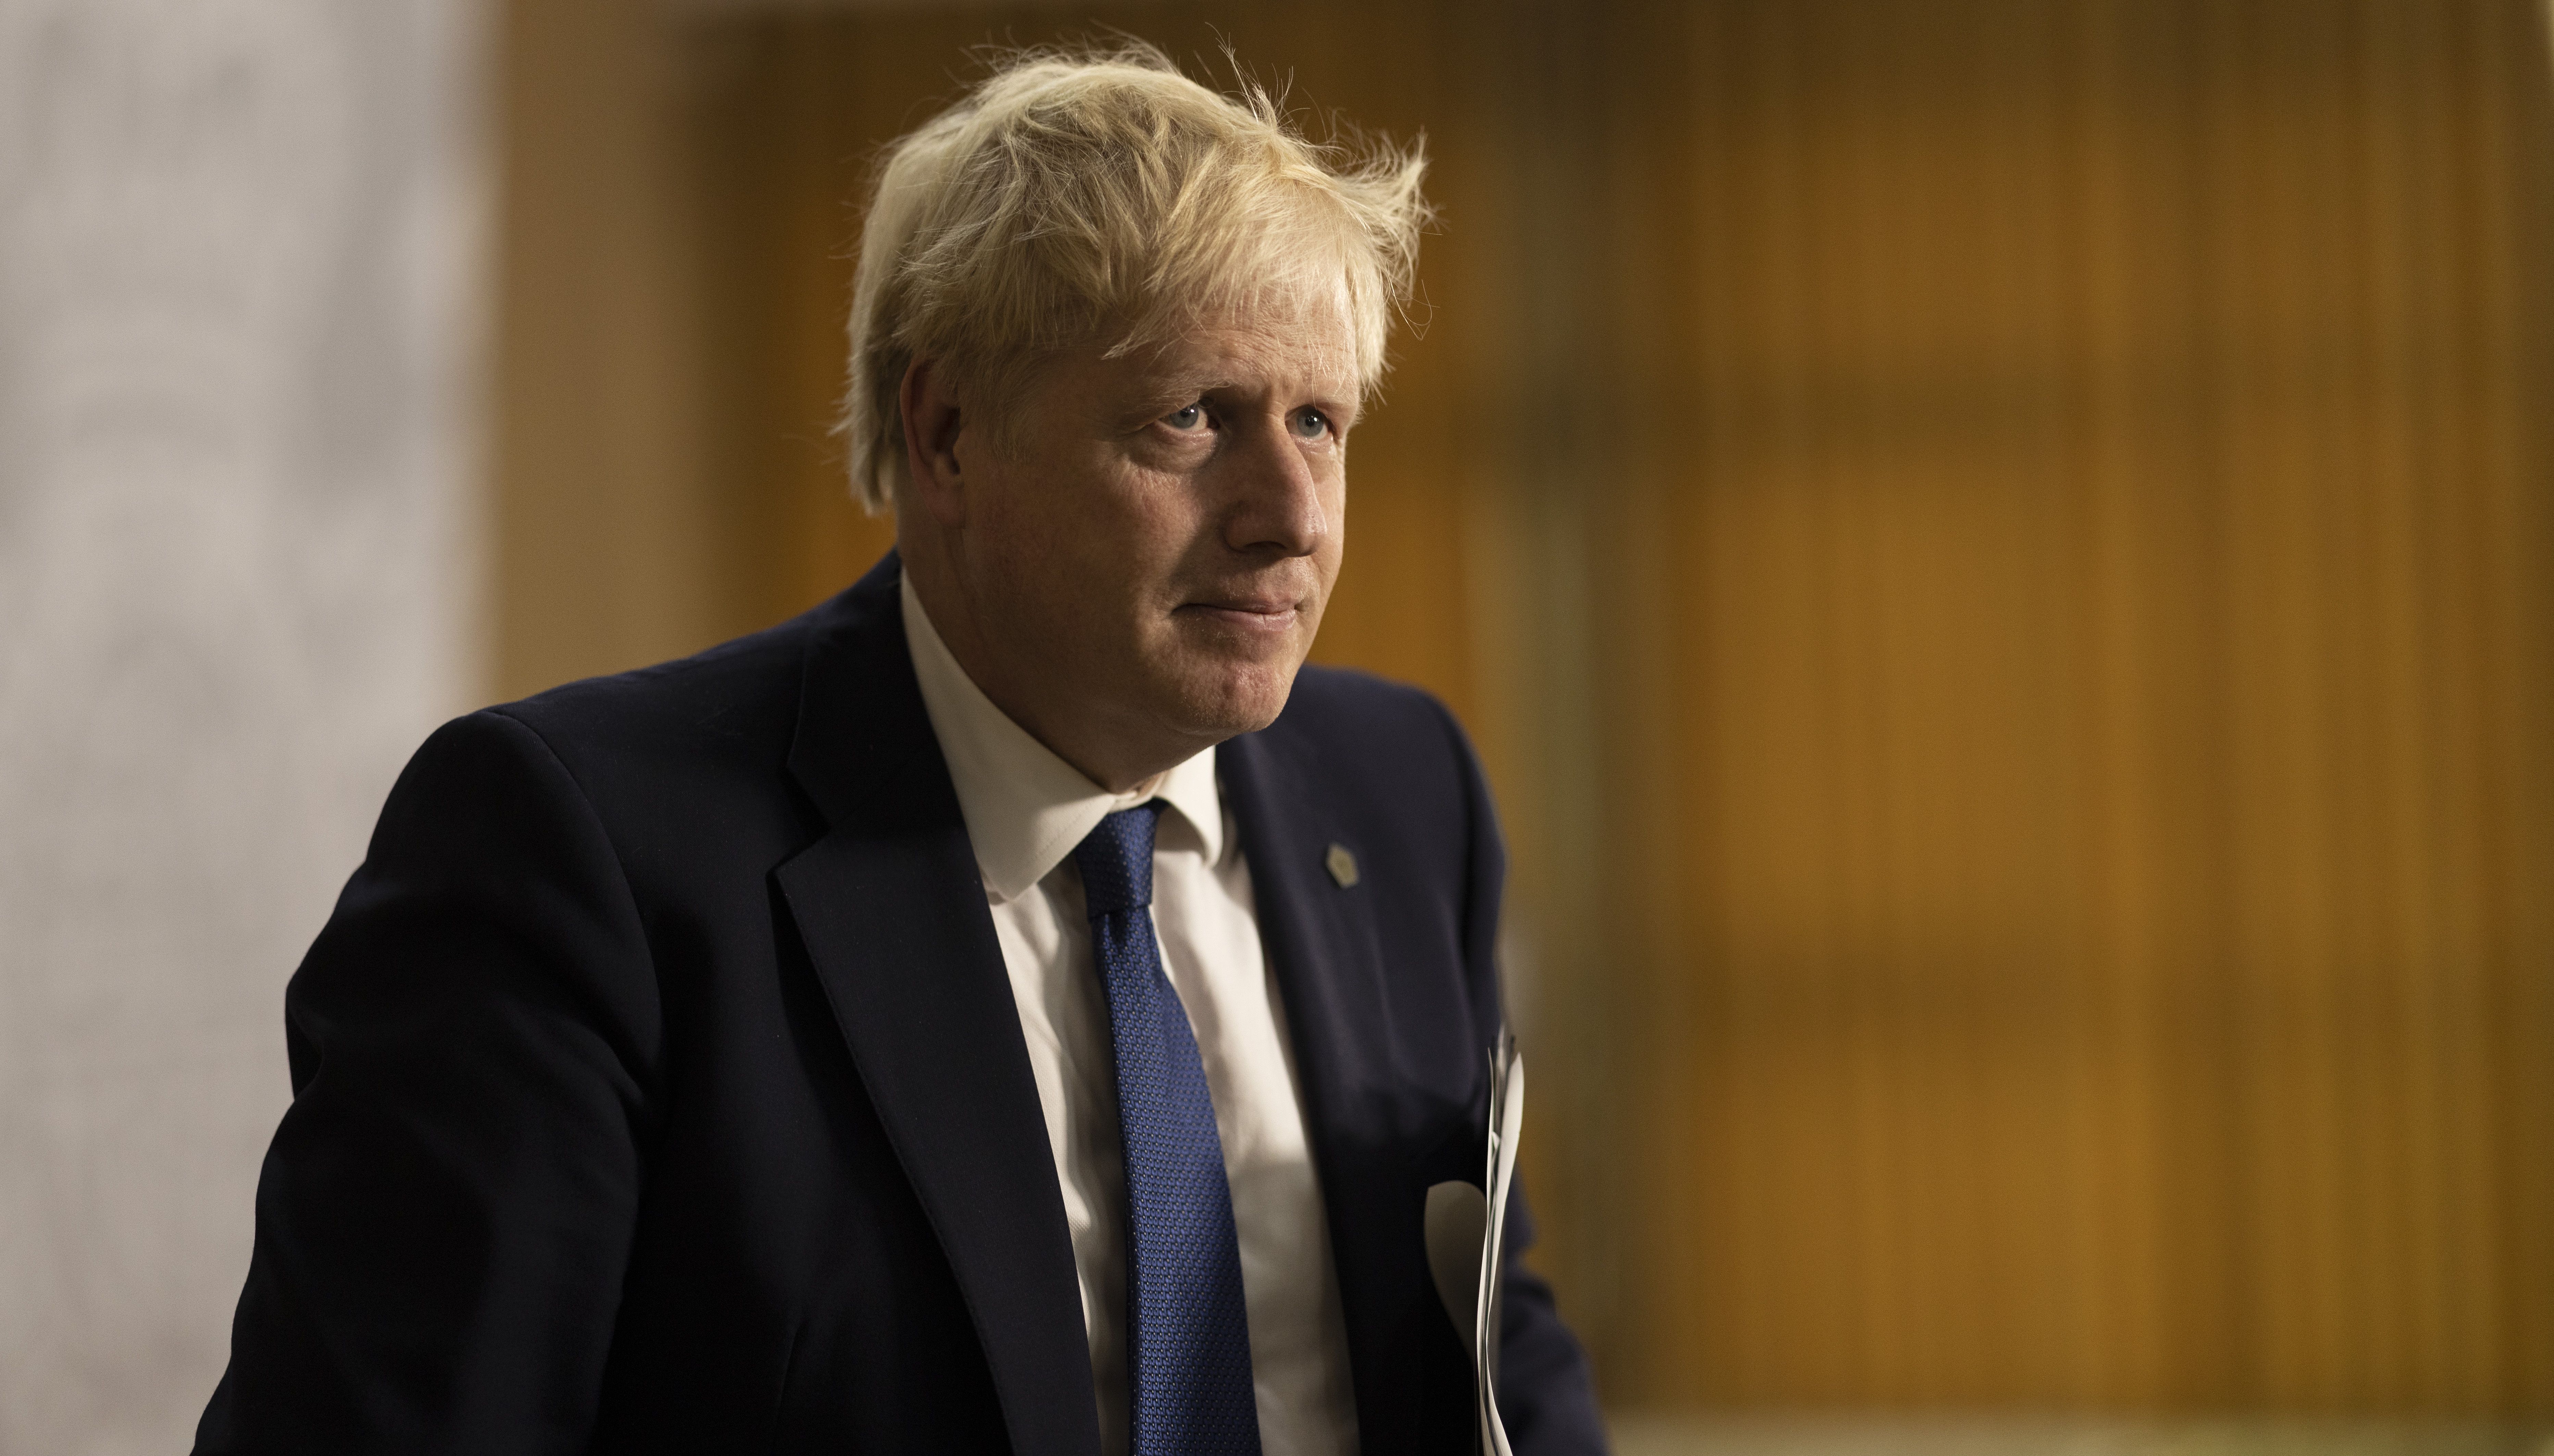 Prime Minister Boris Johnson leaves after speaking at a press conference during the Commonwealth Heads of Government Meeting (CHOGM) at the Lemigo Hotel, Kigali, Rwanda. Picture date: Friday June 24, 2022.